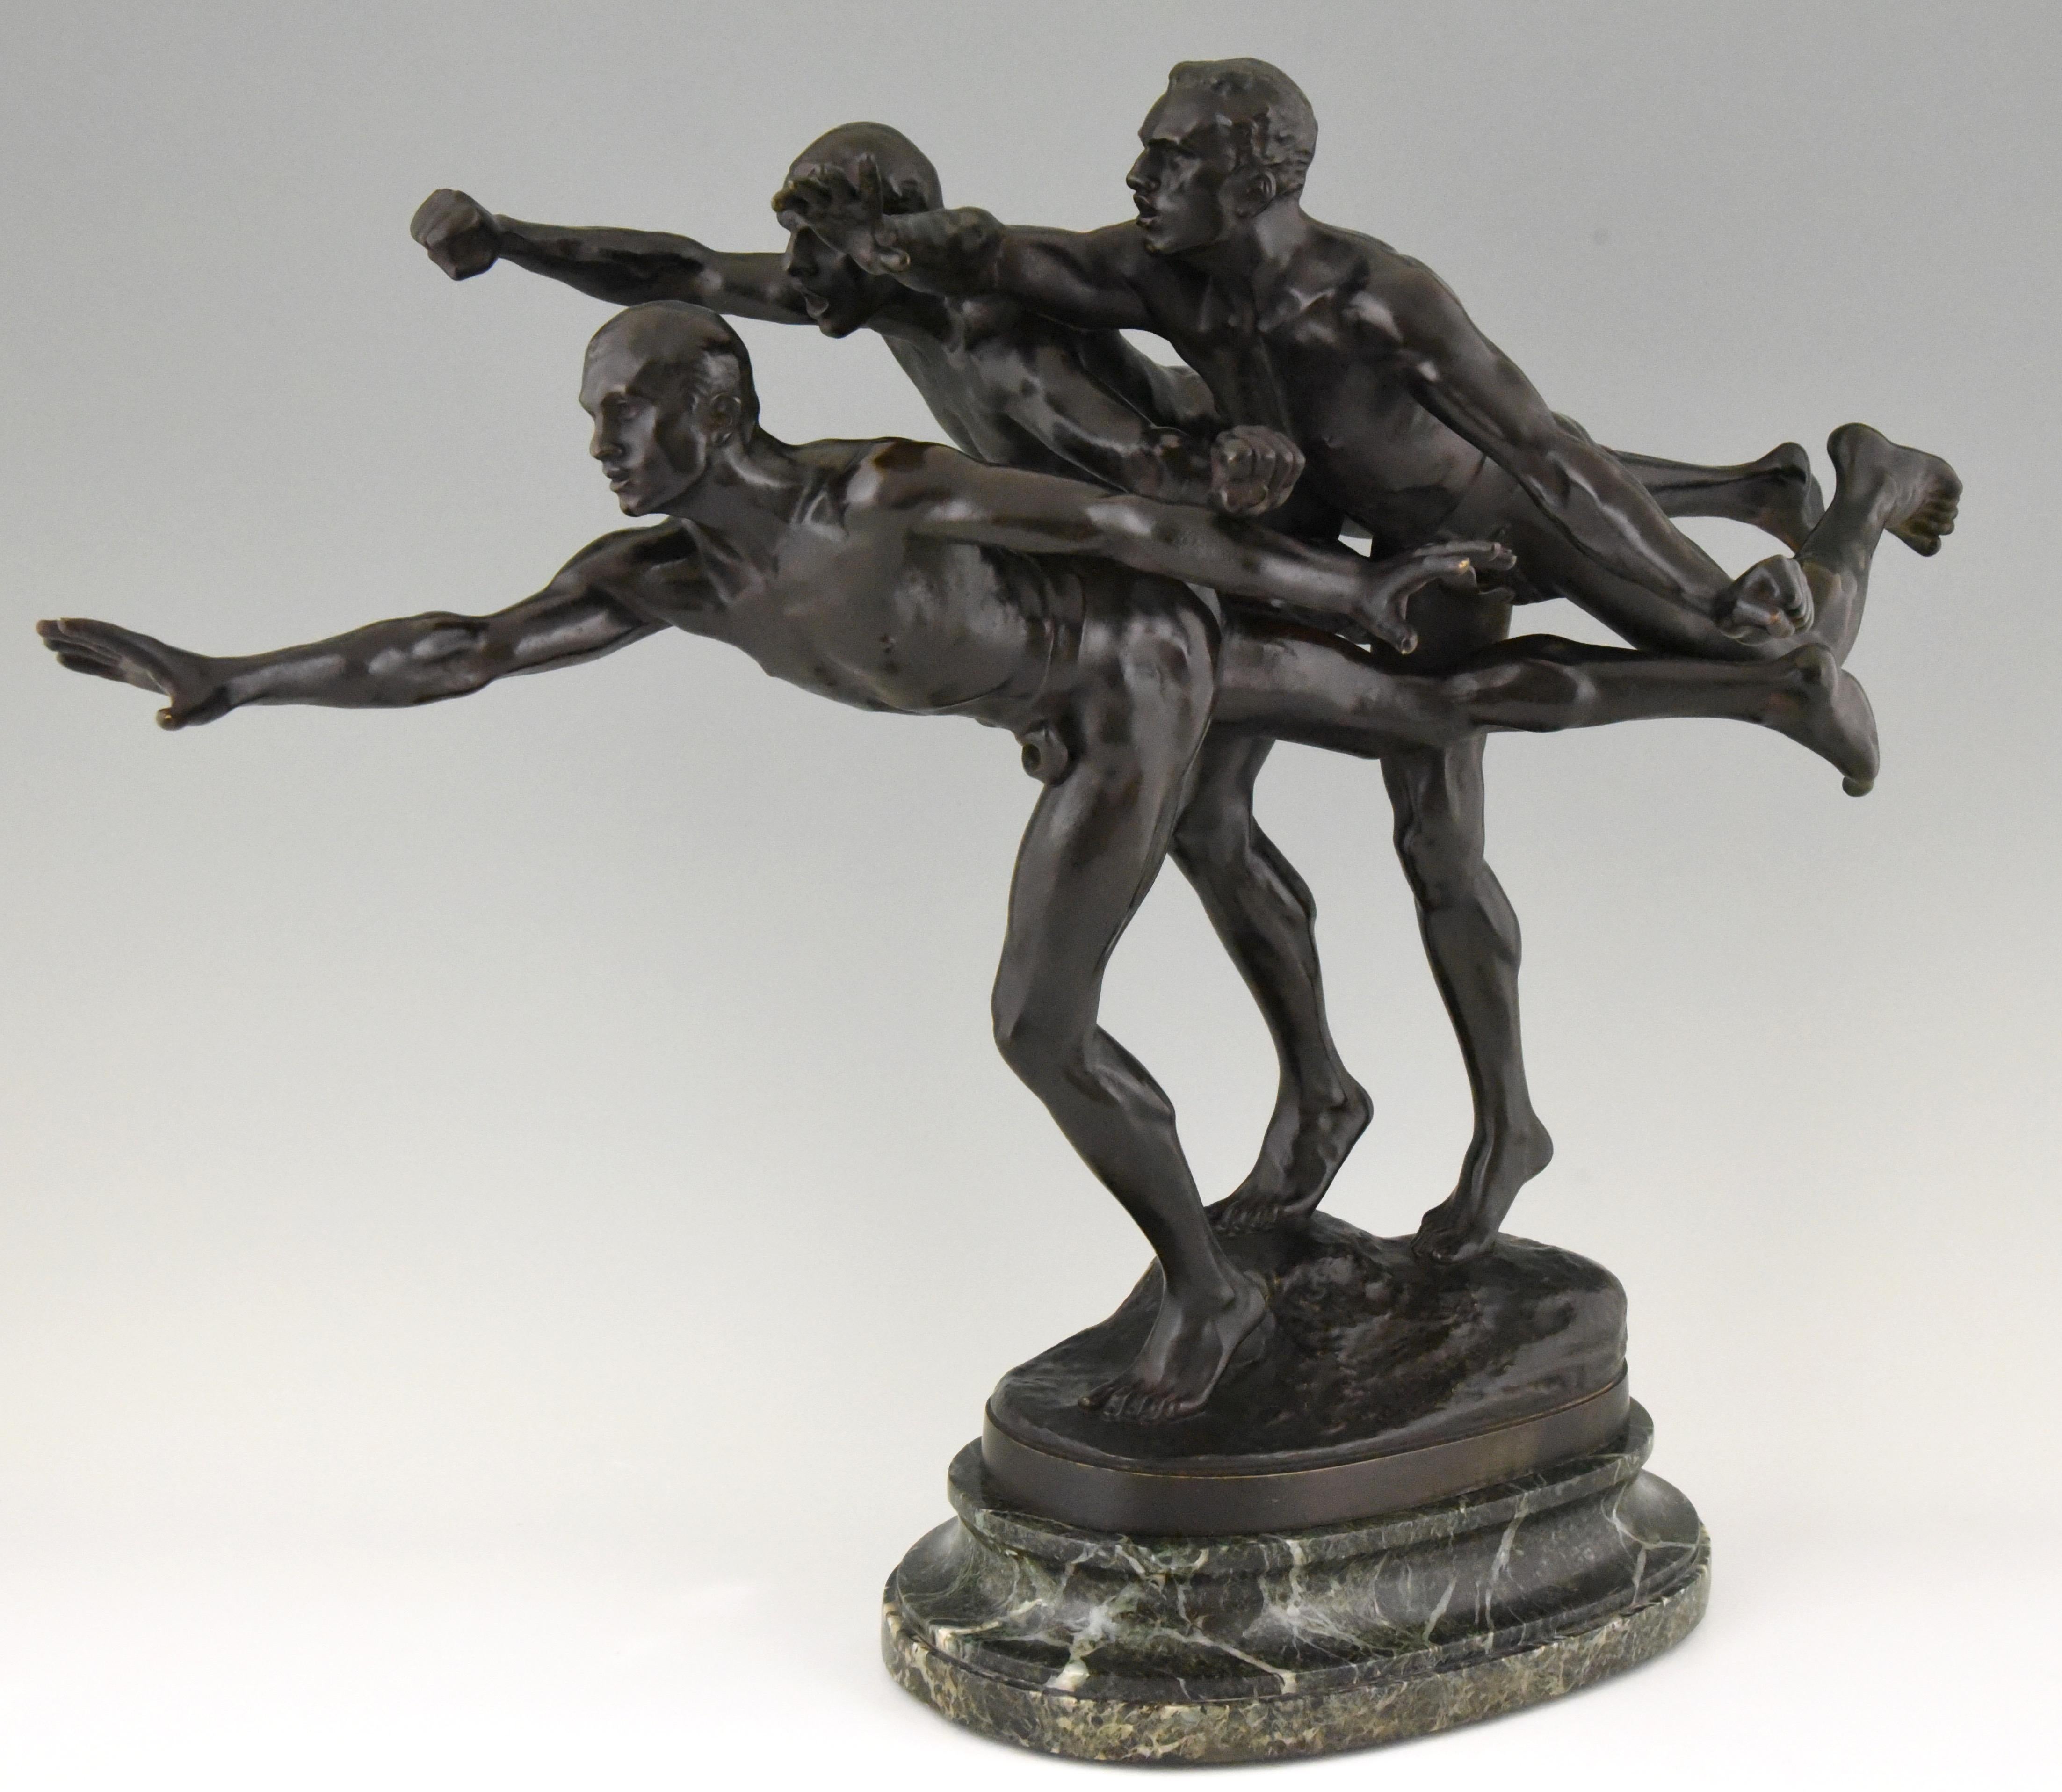 Au but or Les Coureurs, impressive bronze sculpture by the famous French artist Alfred Boucher (1850-1934)
The tree nude runners are just at the goal and intensely struggling, a most difficult theme executed with the greatest skill.
This bronze is